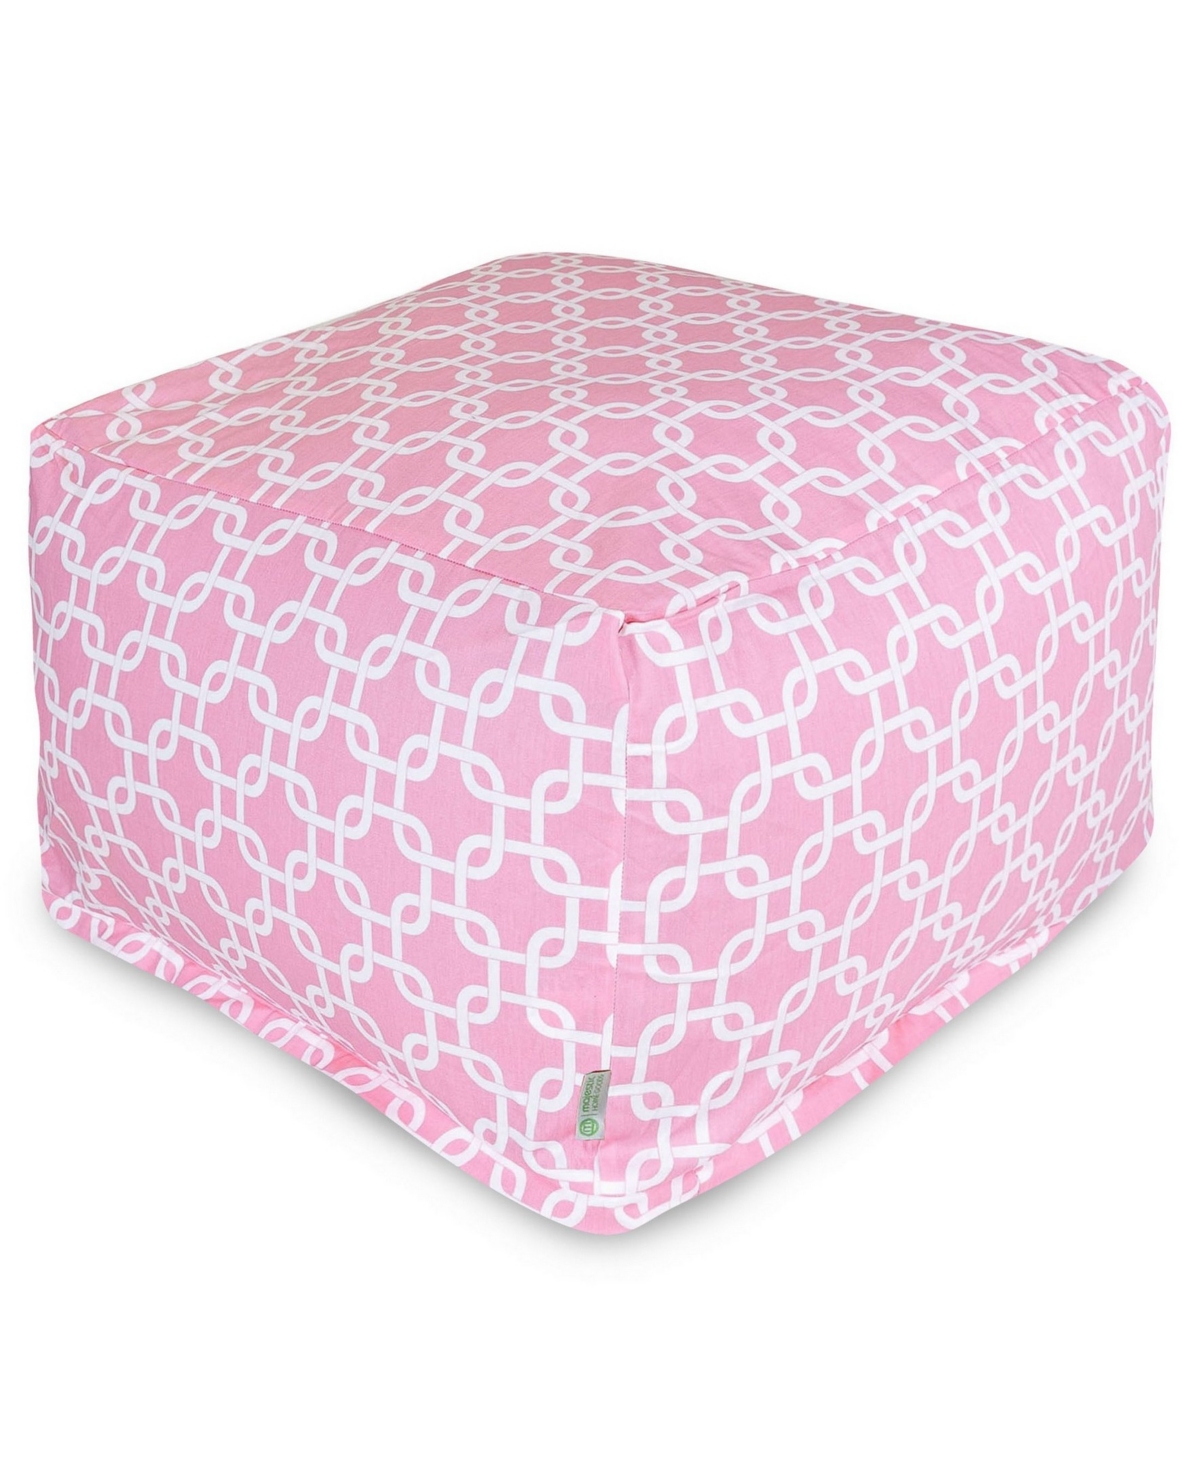 UPC 859072102019 product image for Majestic Home Goods Links Ottoman Square Pouf with Removable Cover 27